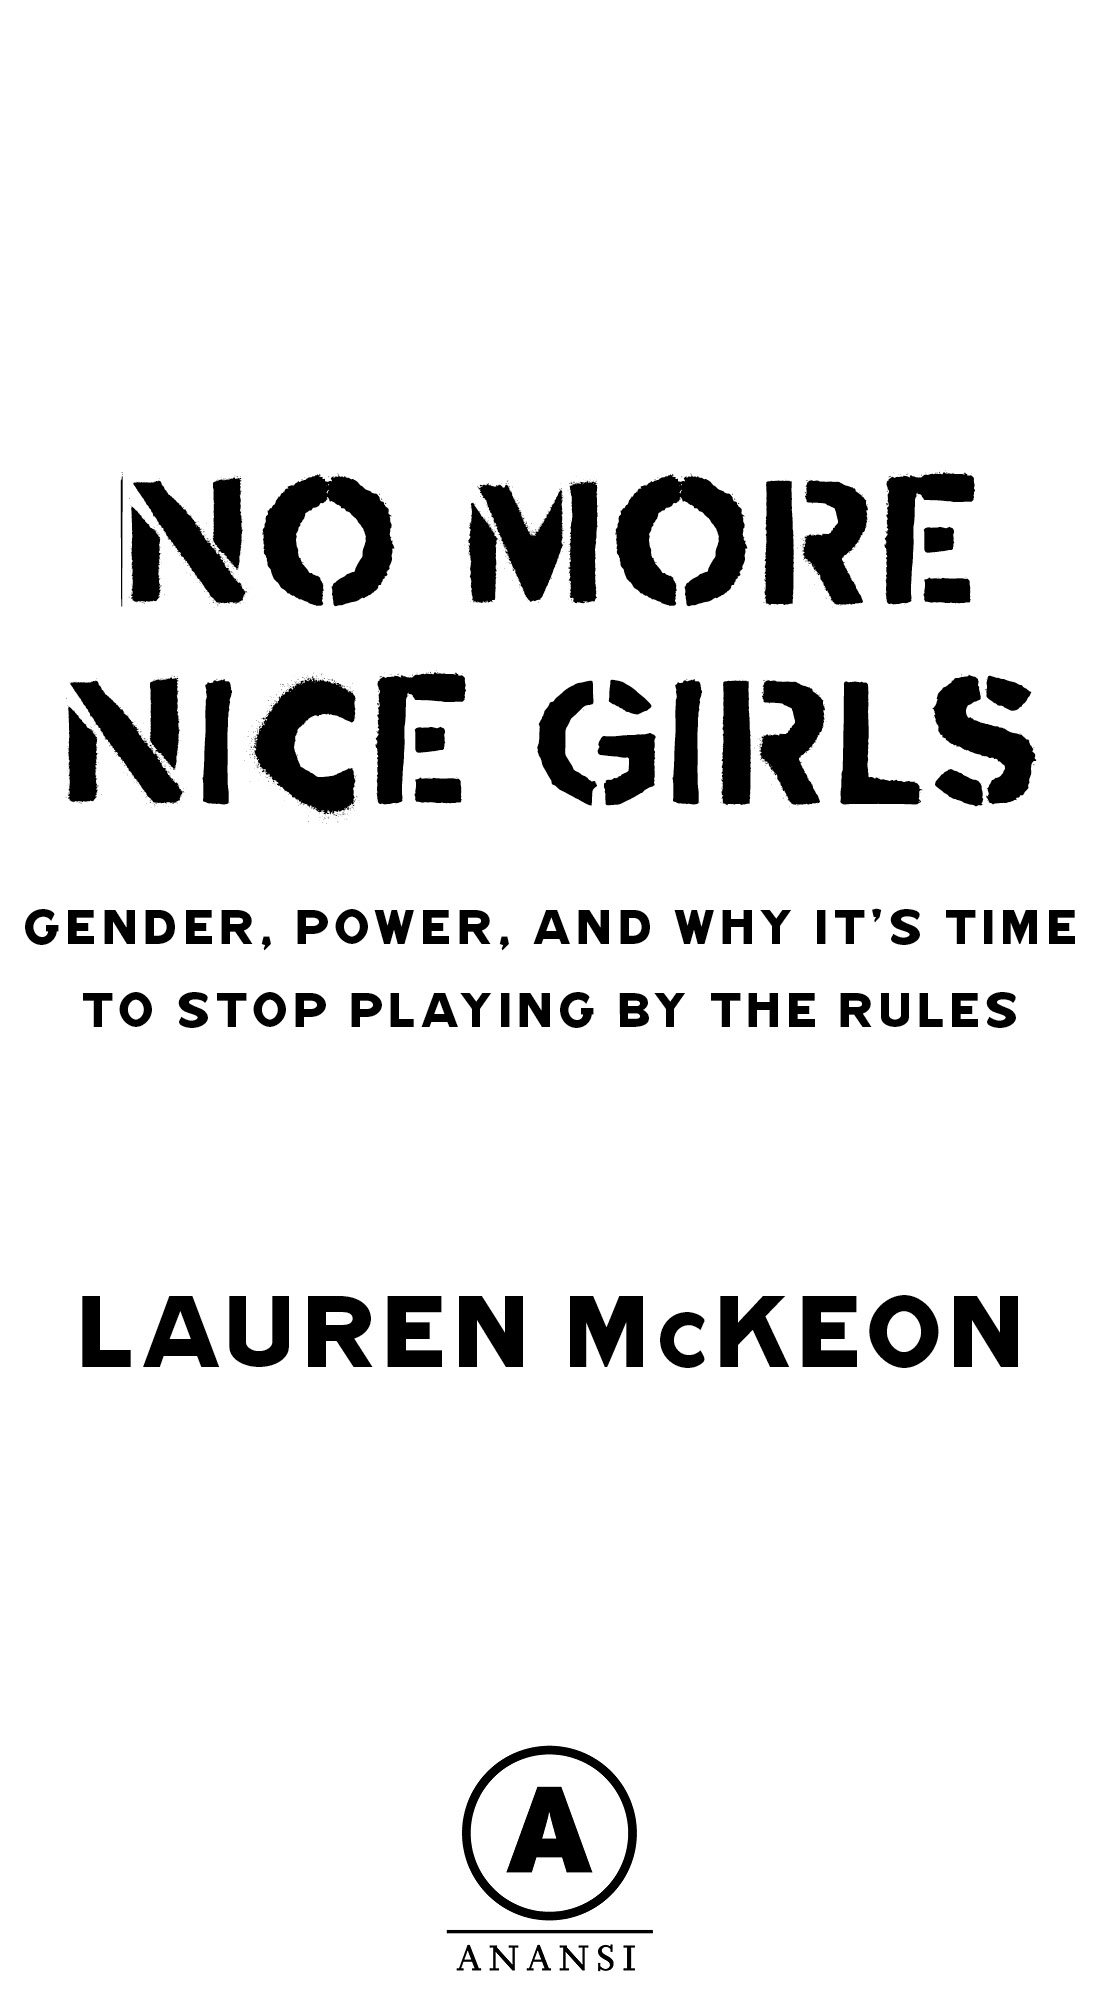 Copyright 2020 Lauren McKeon Published in Canada in 2020 and in the USA in 2020 - photo 2